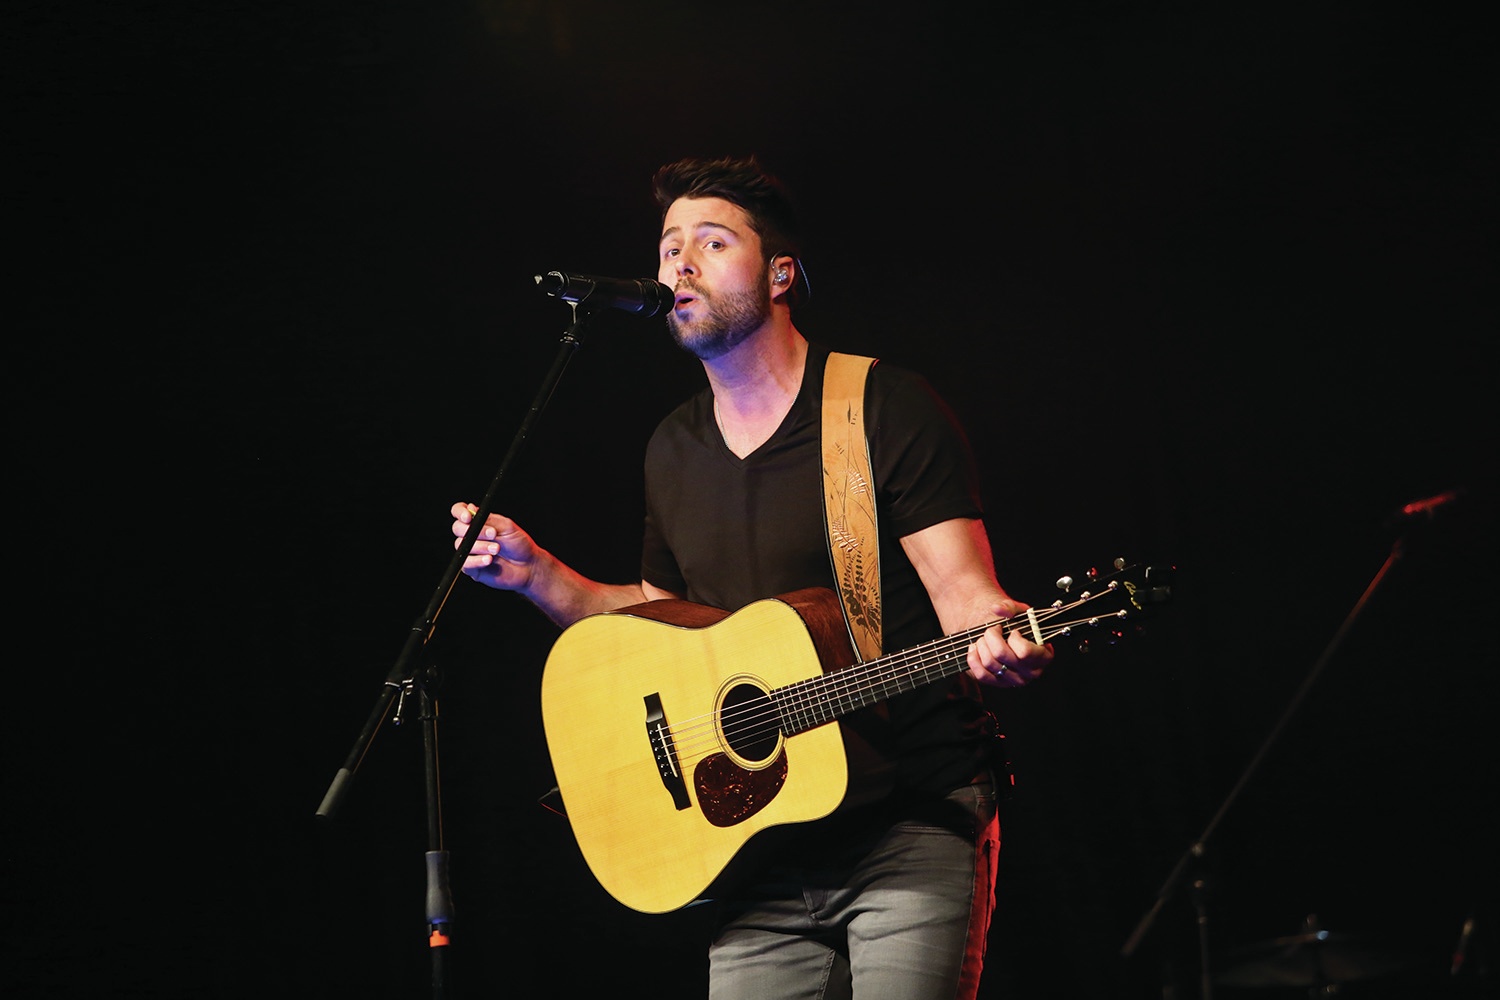 HOMETOWN HERO - Central Alberta country singer Jamie Woodfin performed at the ACMA Alberta Country Music Awards at the Sheraton Hotel on Sunday.